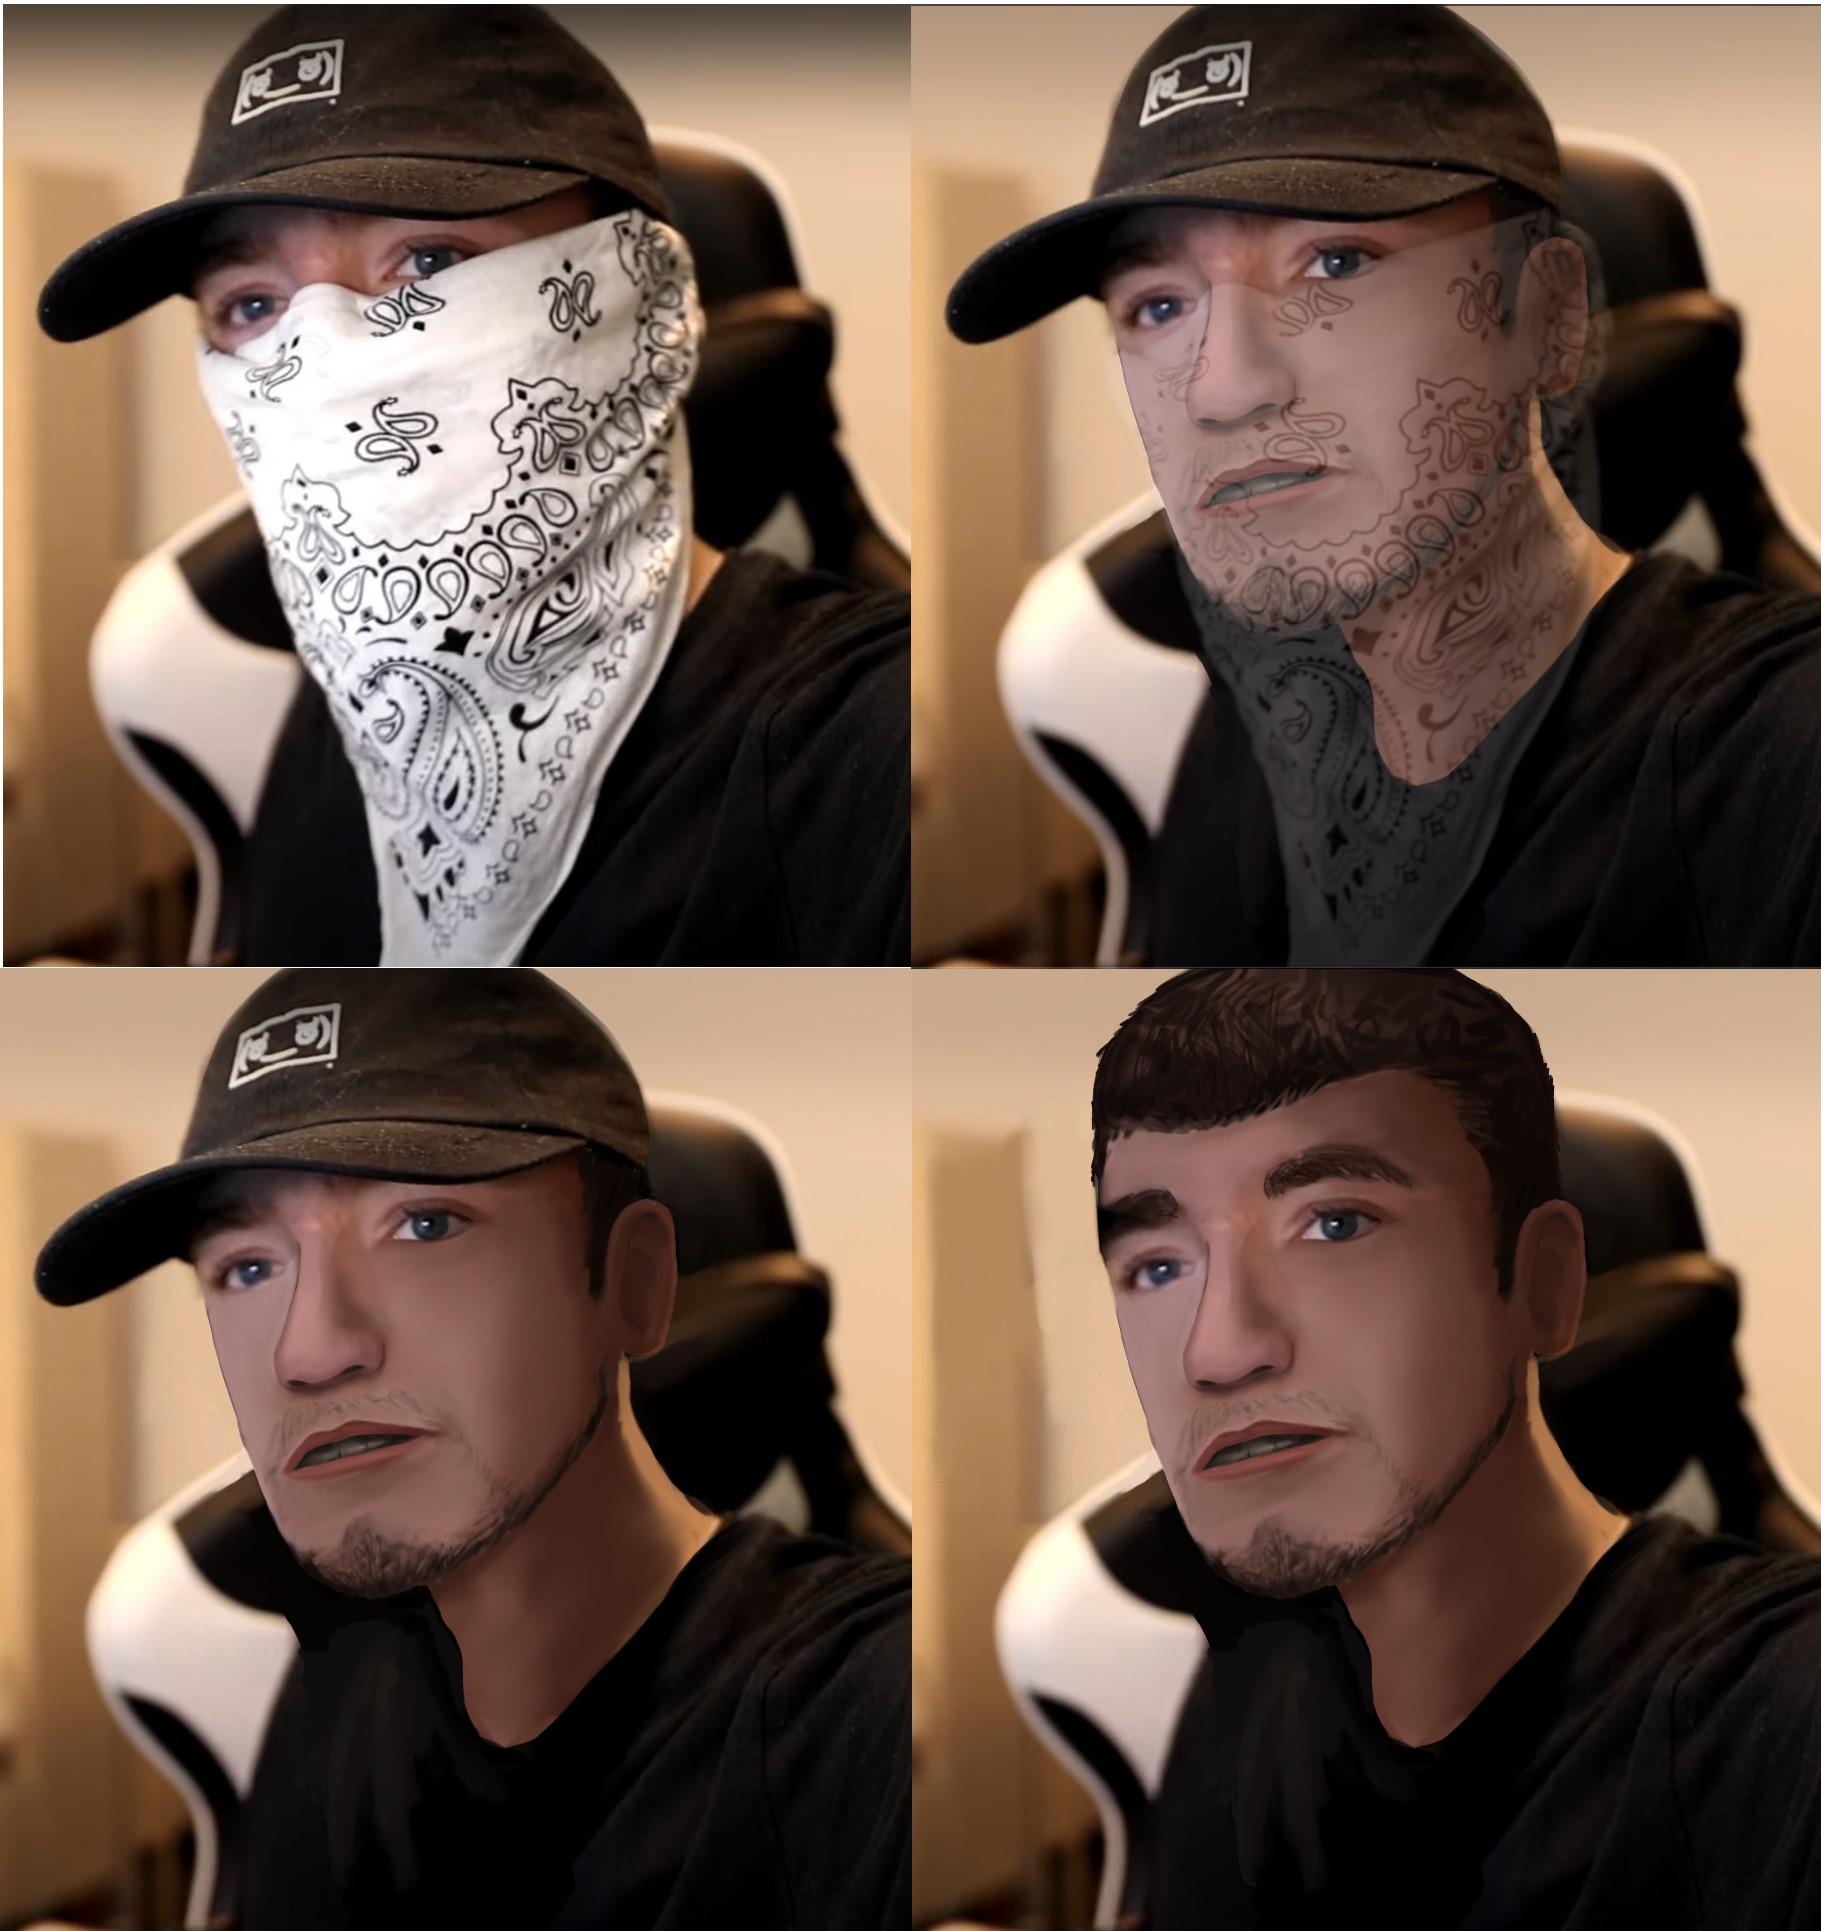 Software image shows what Memeulous looks like unmasked